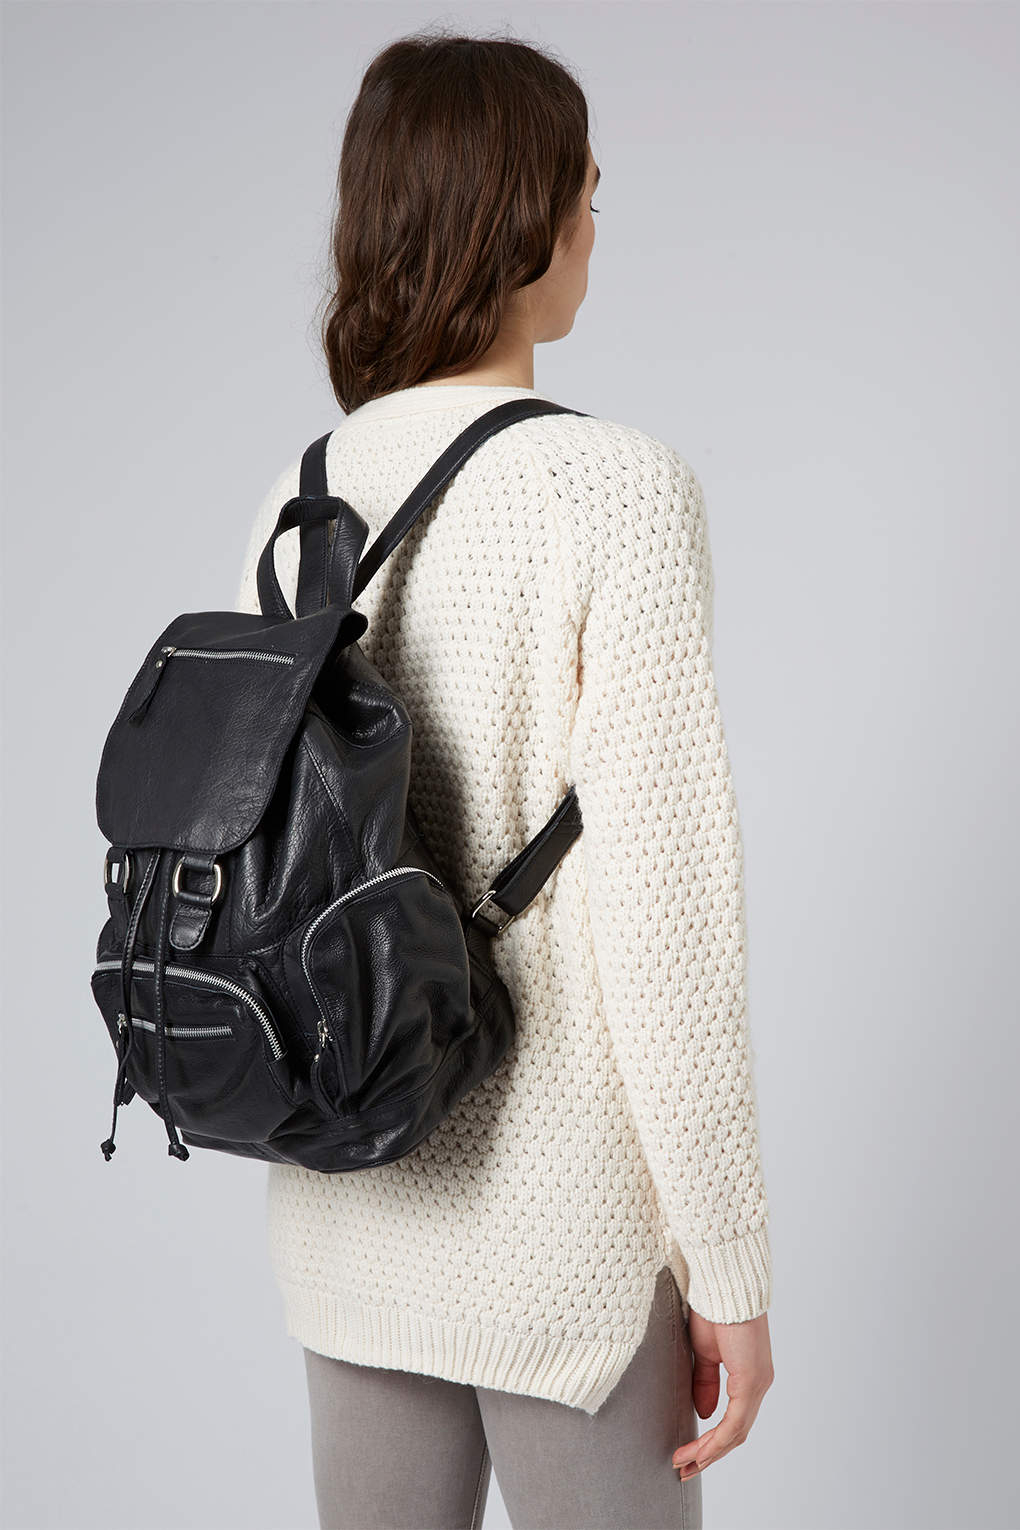 TOPSHOP Premium Leather Backpack in Black - Lyst